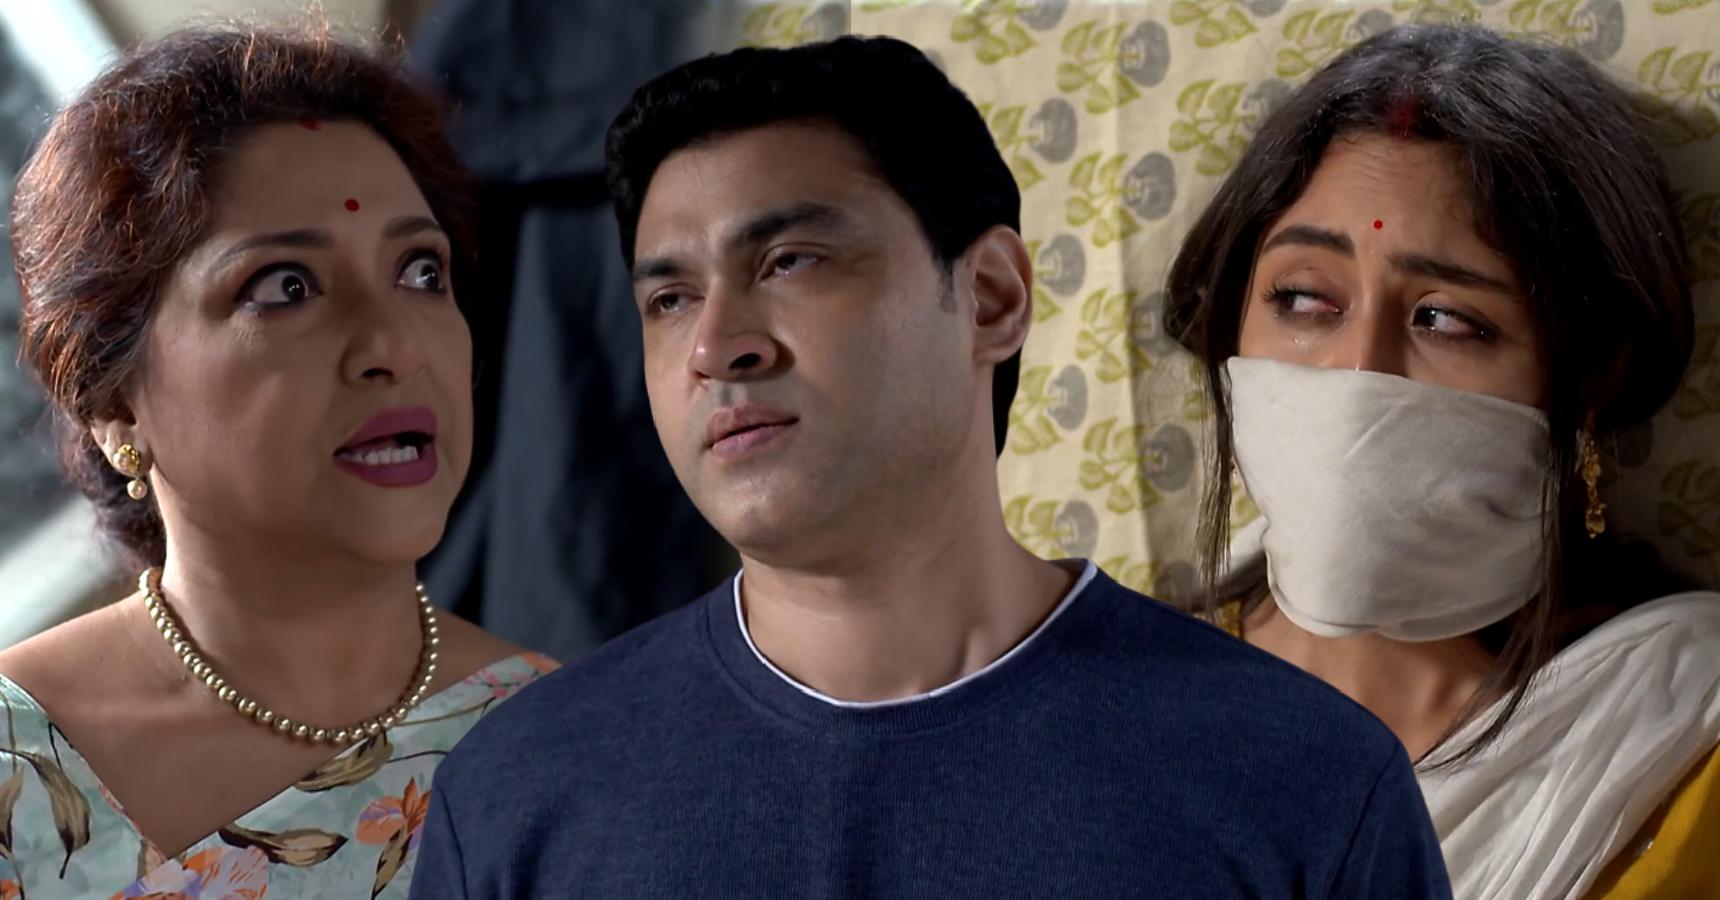 Icche Putul Rup Ties up Gini in Room Shalili got scared